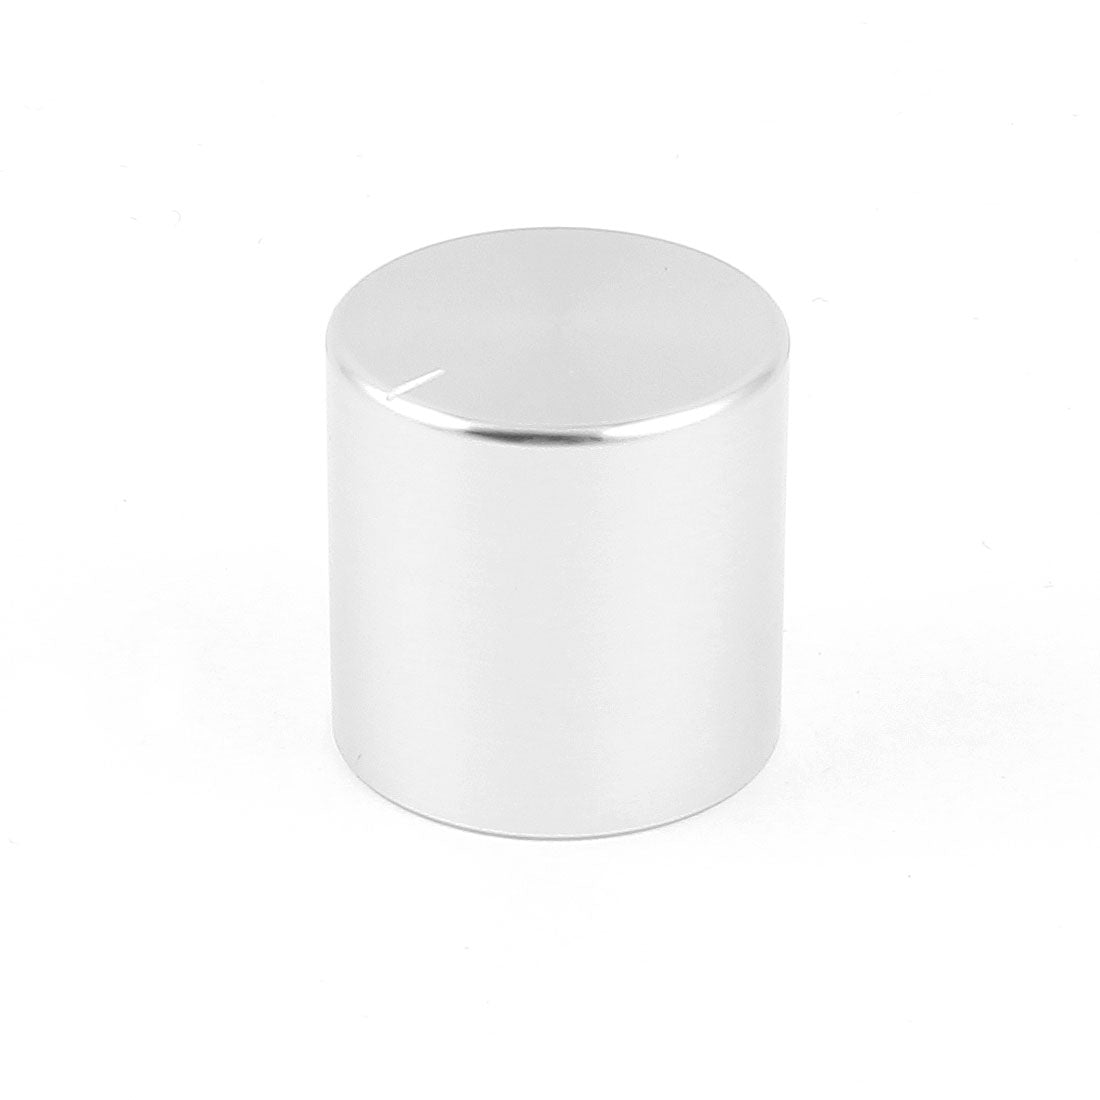 uxcell Uxcell Silver Tone CNC Machined Solid Aluminum Hifi Speaker Radio Volume Control Knobs 25x25mm